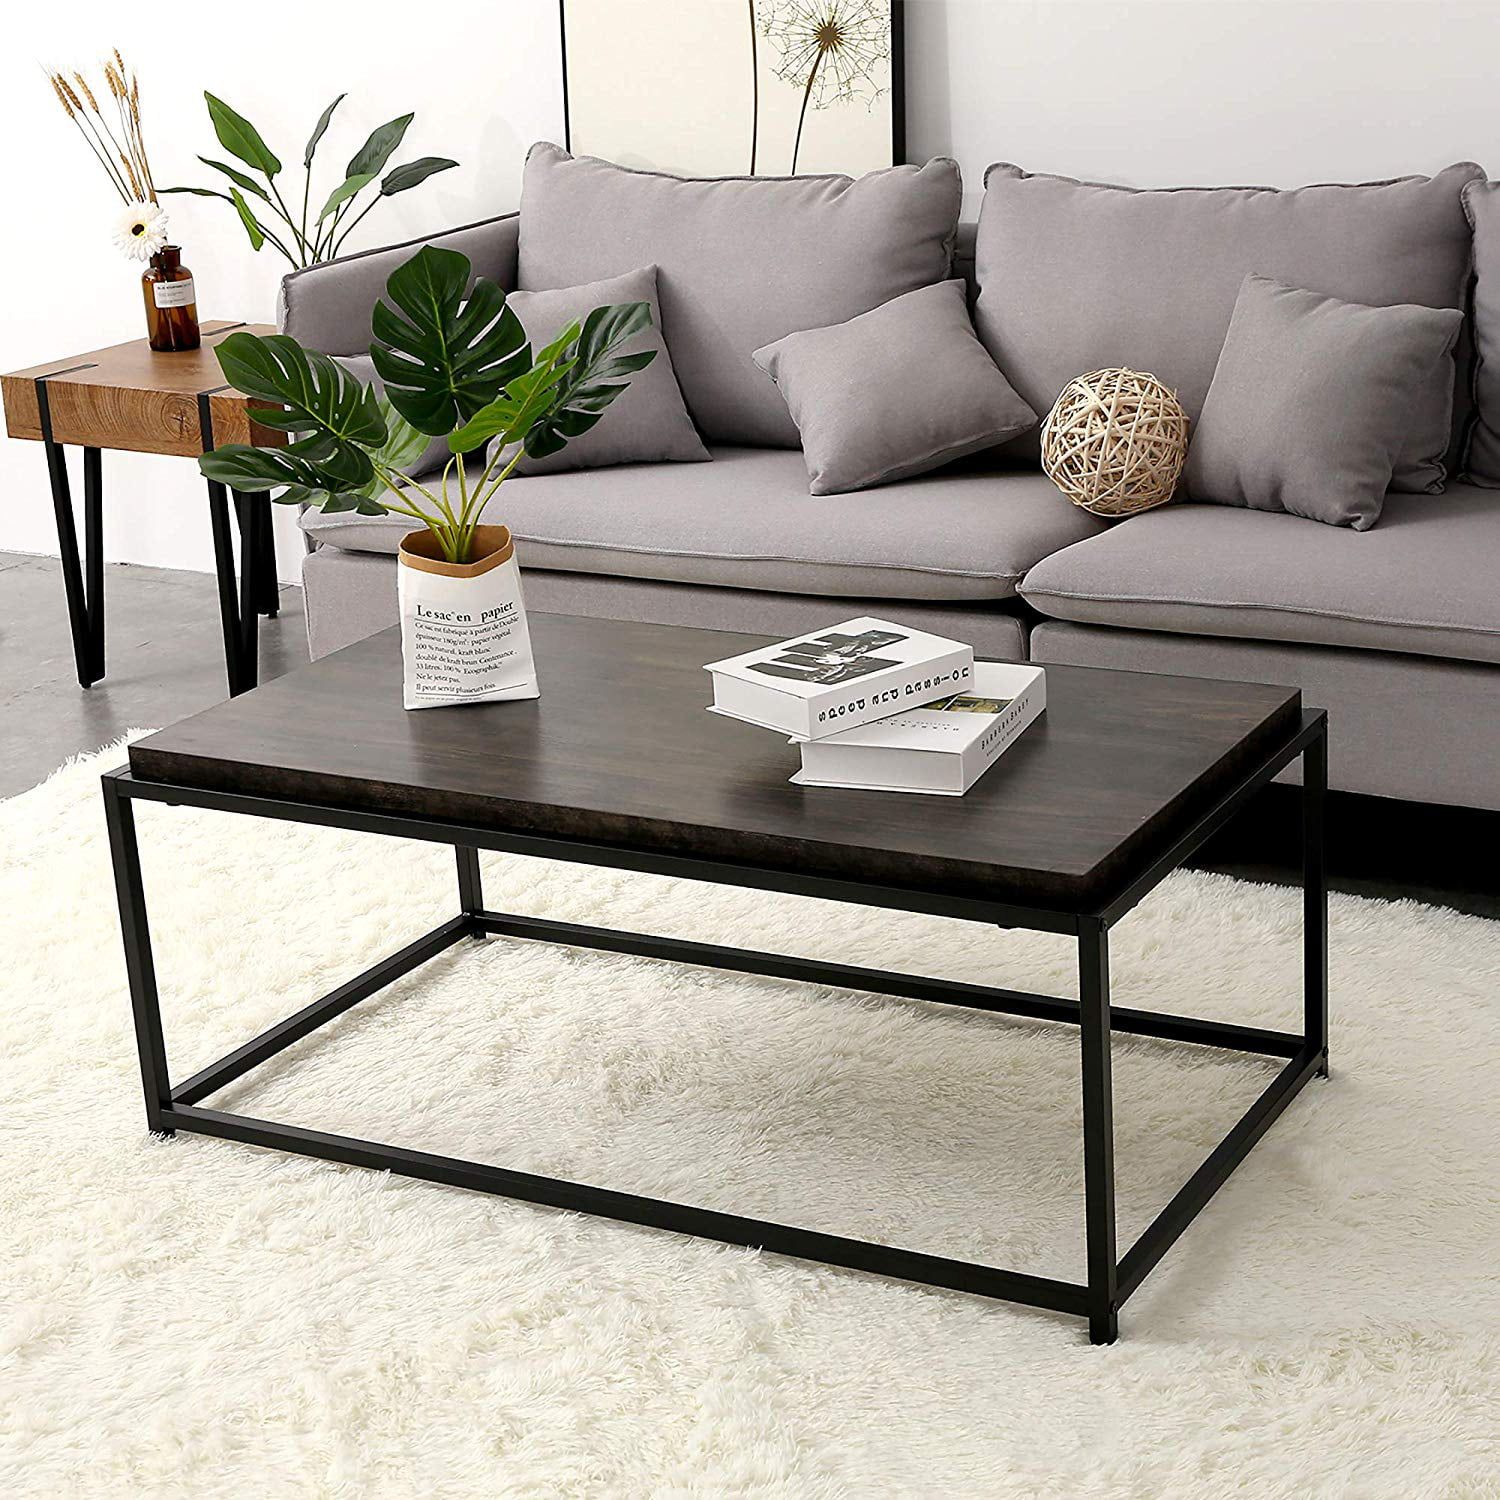 Ivinta Wood Coffee Table Modern Industrial Space Saving Couch Living With Regard To Espresso Wood Finish Coffee Tables (Gallery 9 of 21)